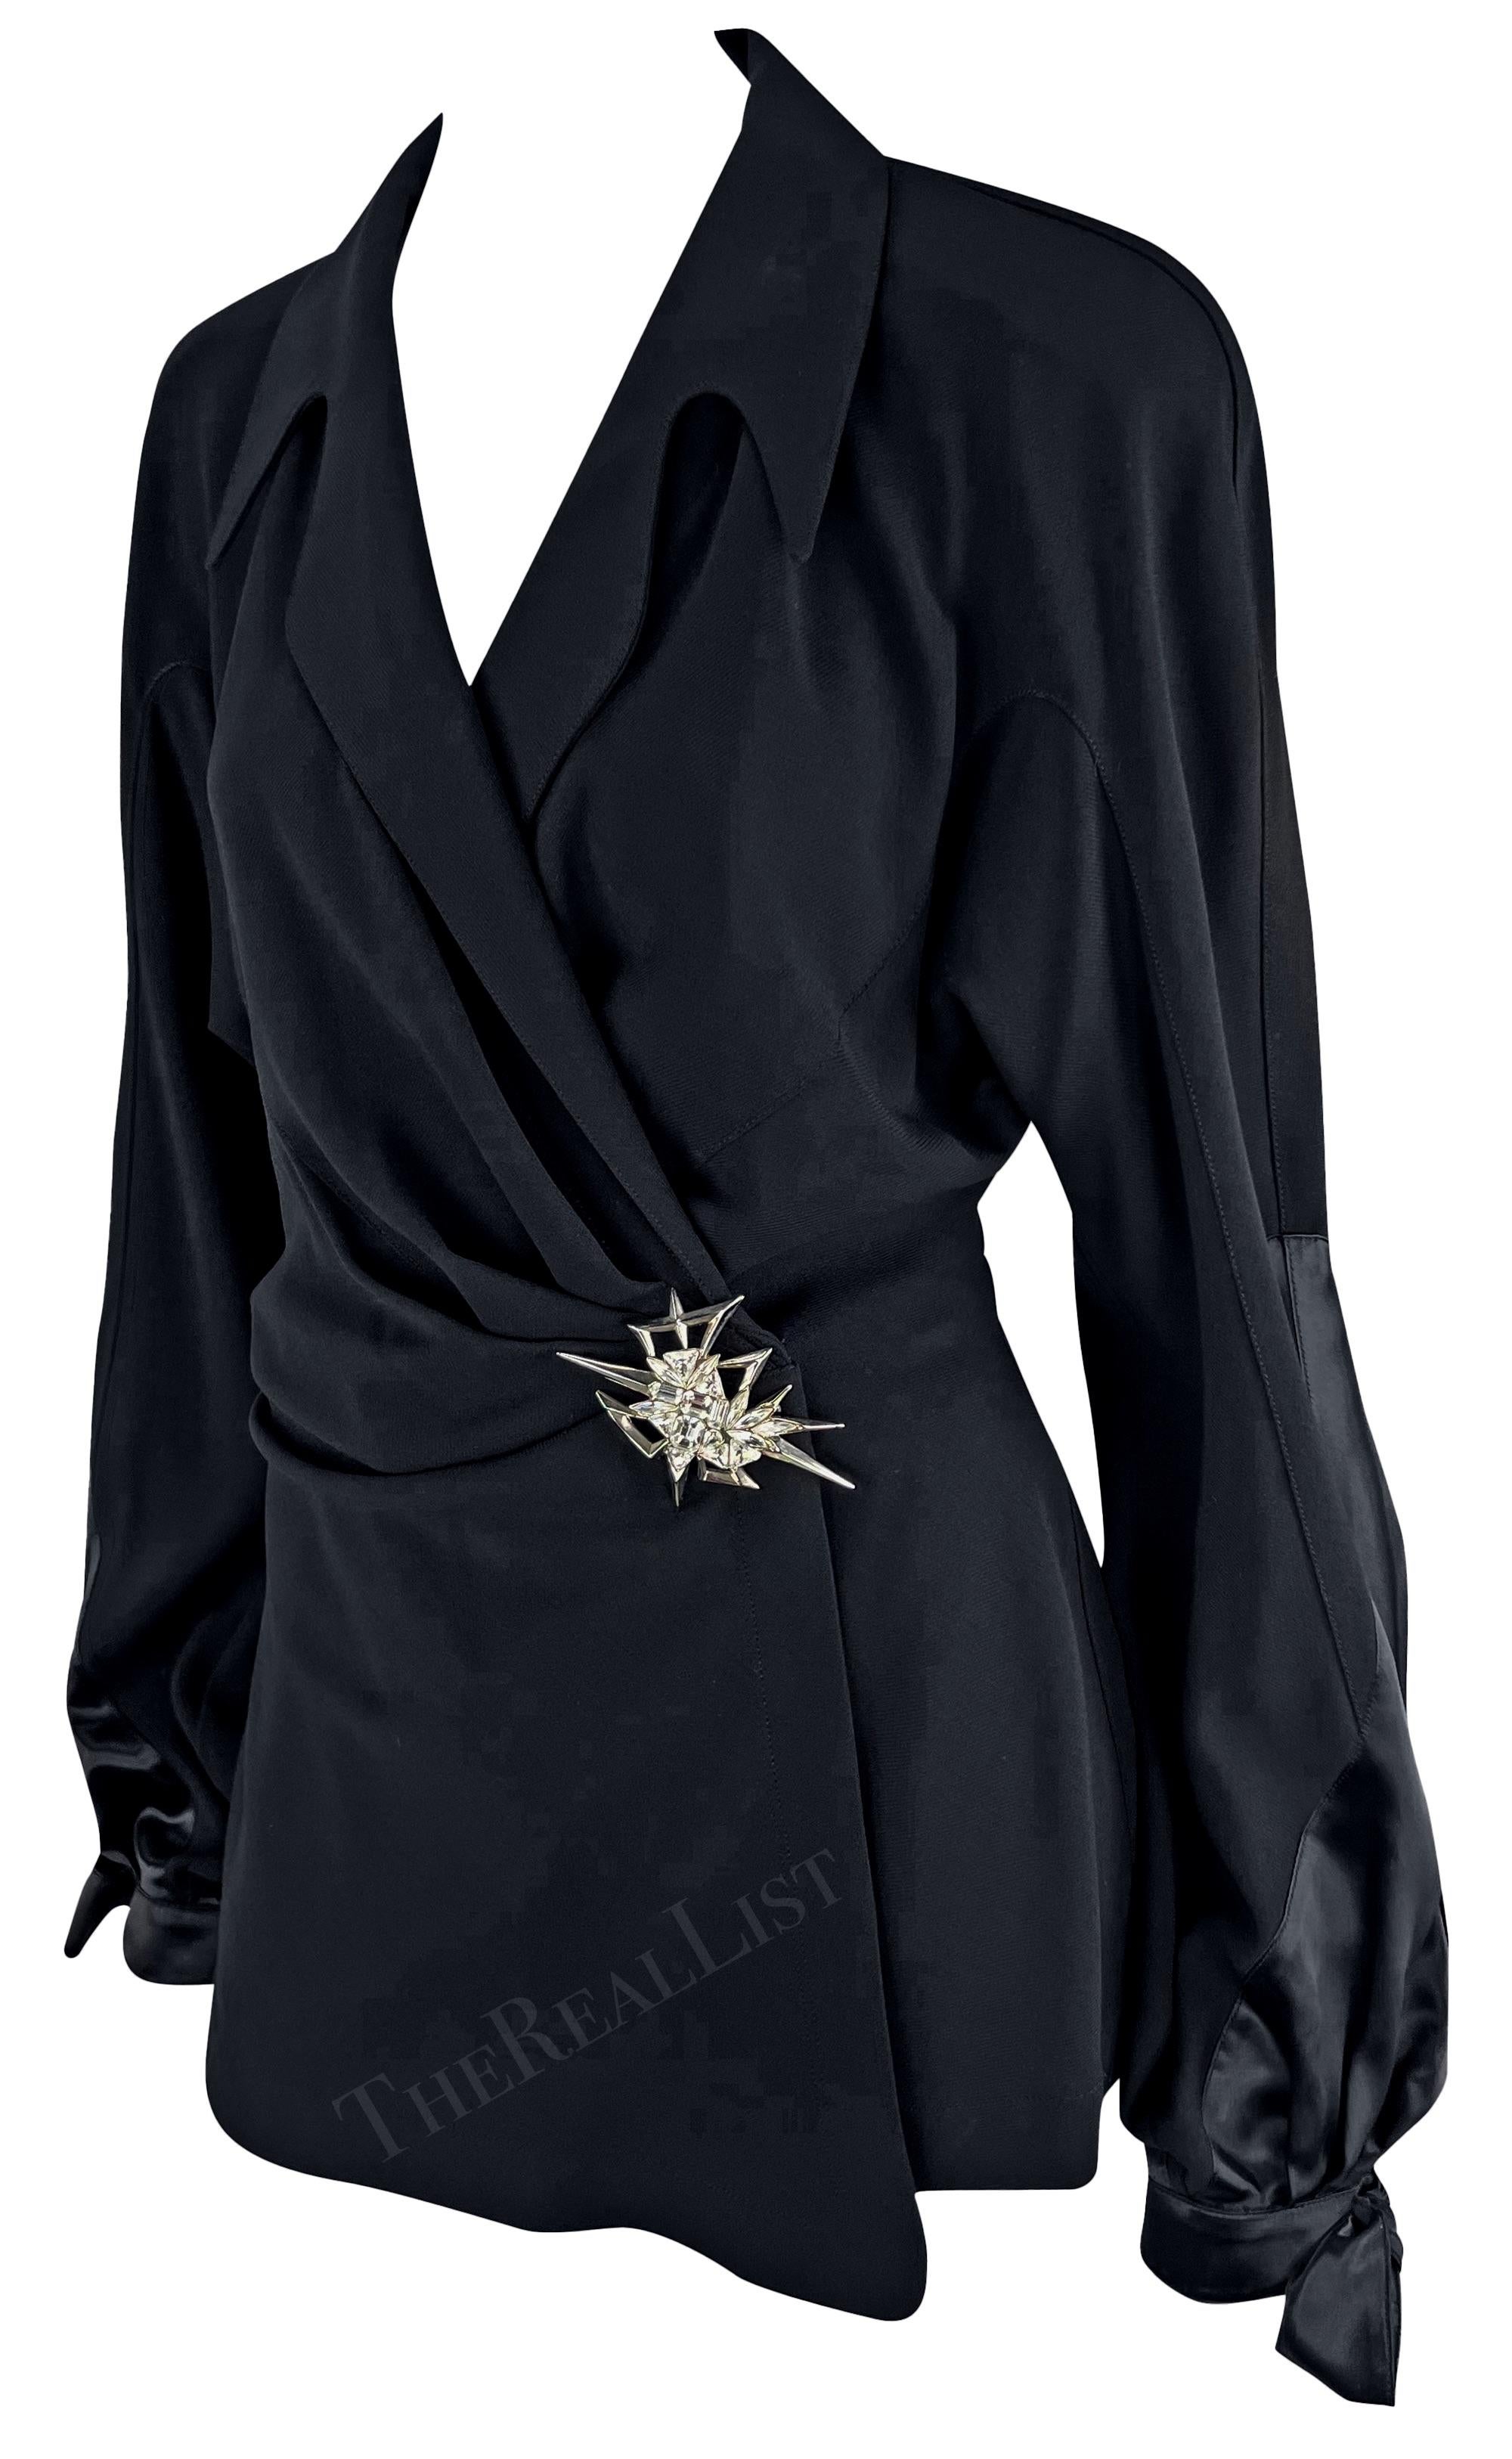 Introducing a stunning piece from the 1990s, a fabulous black balloon sleeve blazer designed by Manfred Mugler for Thierry Mugler. This chic wrap blazer features a large rhinestone-covered silver-tone brooch closure. Its defining feature are the